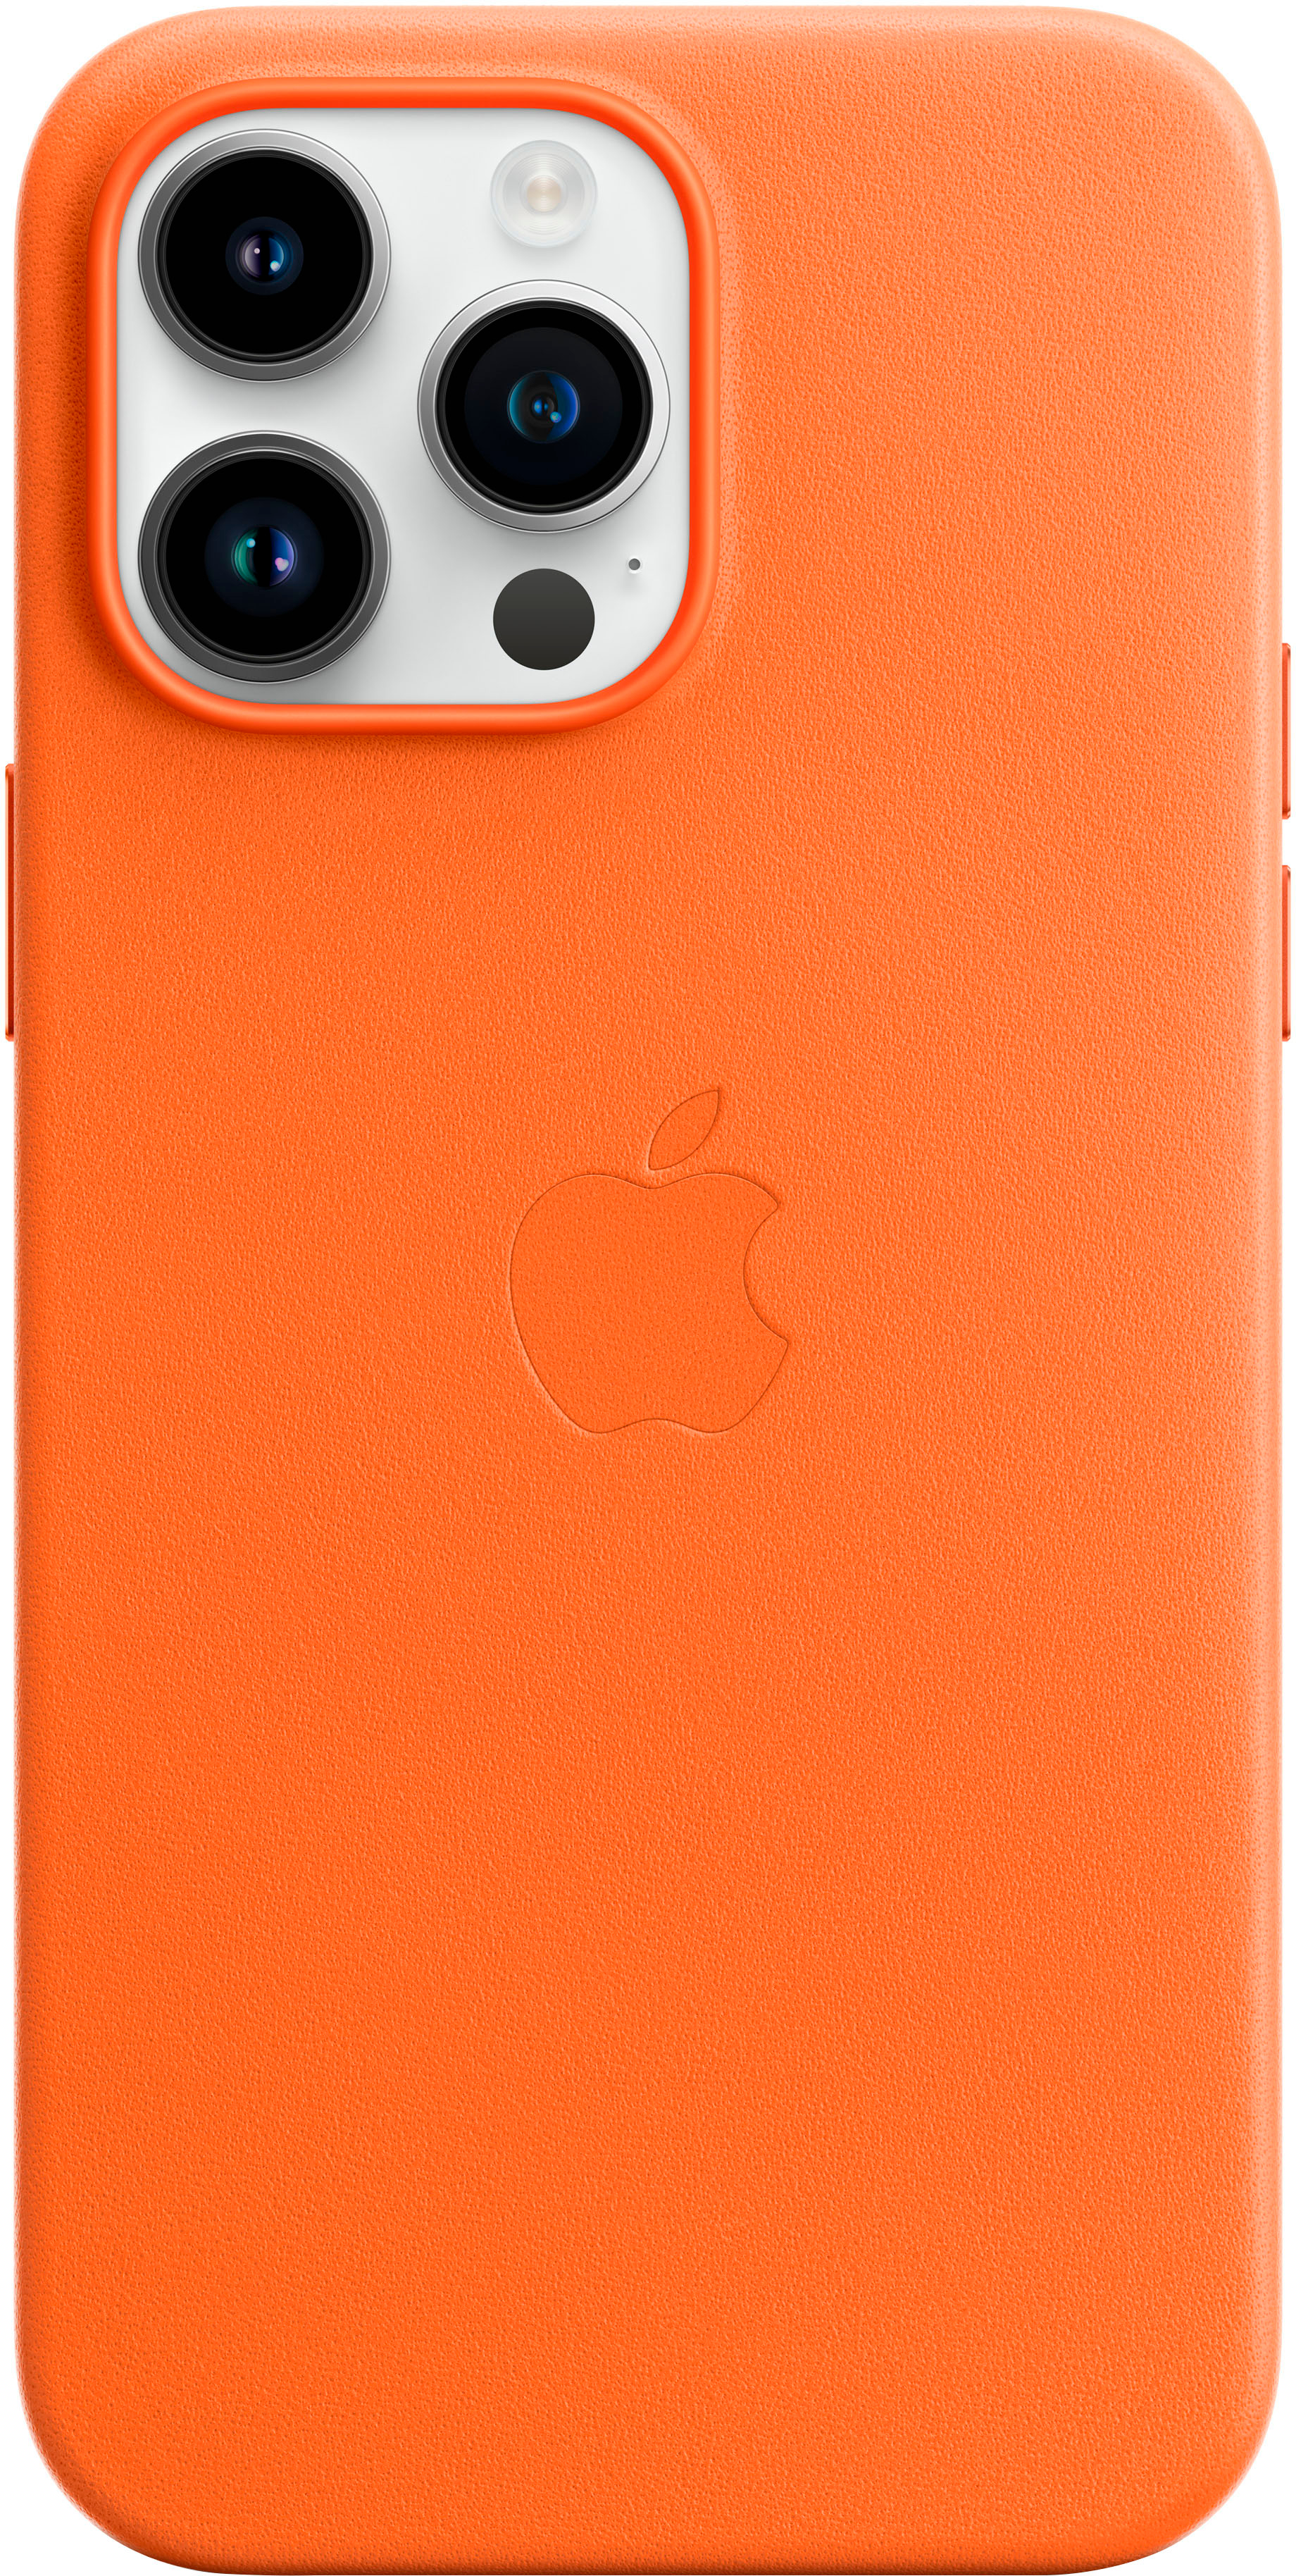 iPhone 14 Pro Max and Orange Leather Case Unboxing 